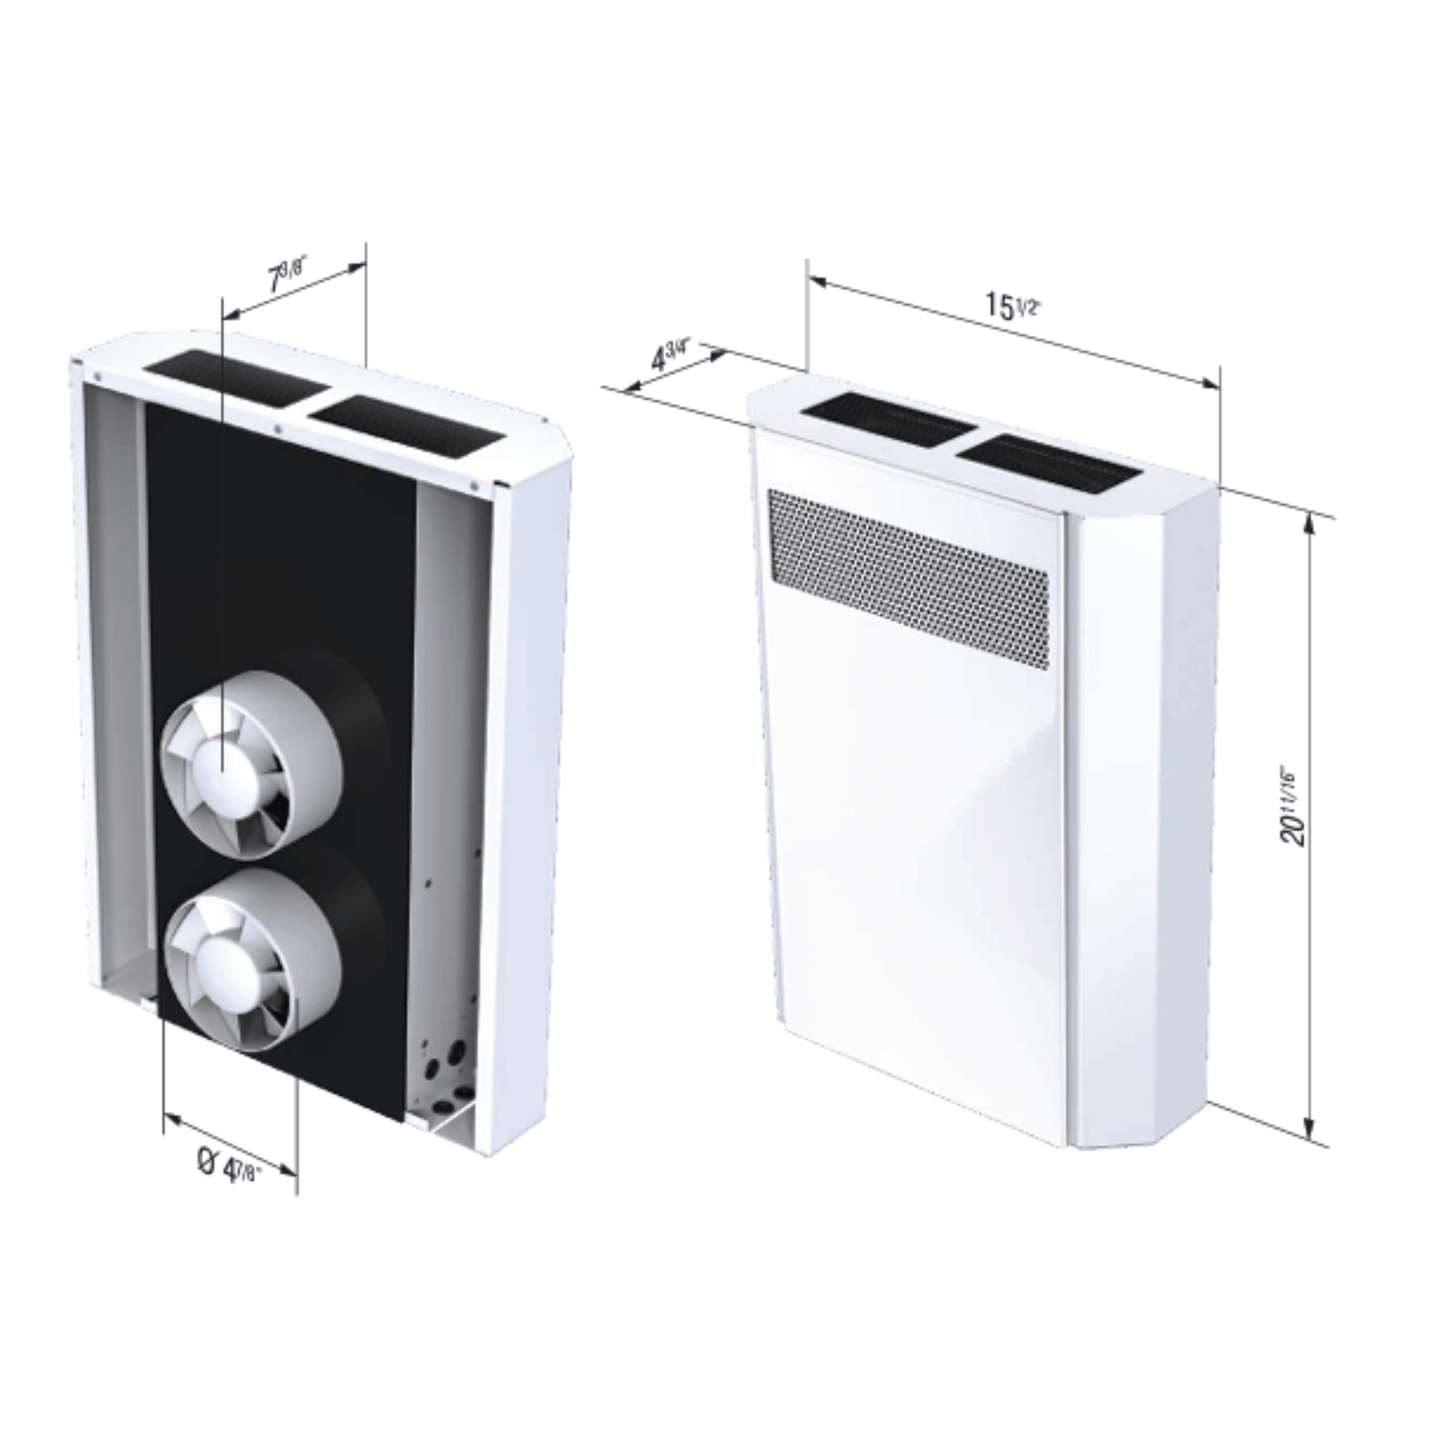 Vents Micra 60 Ductless Heat Recovery Ventilator